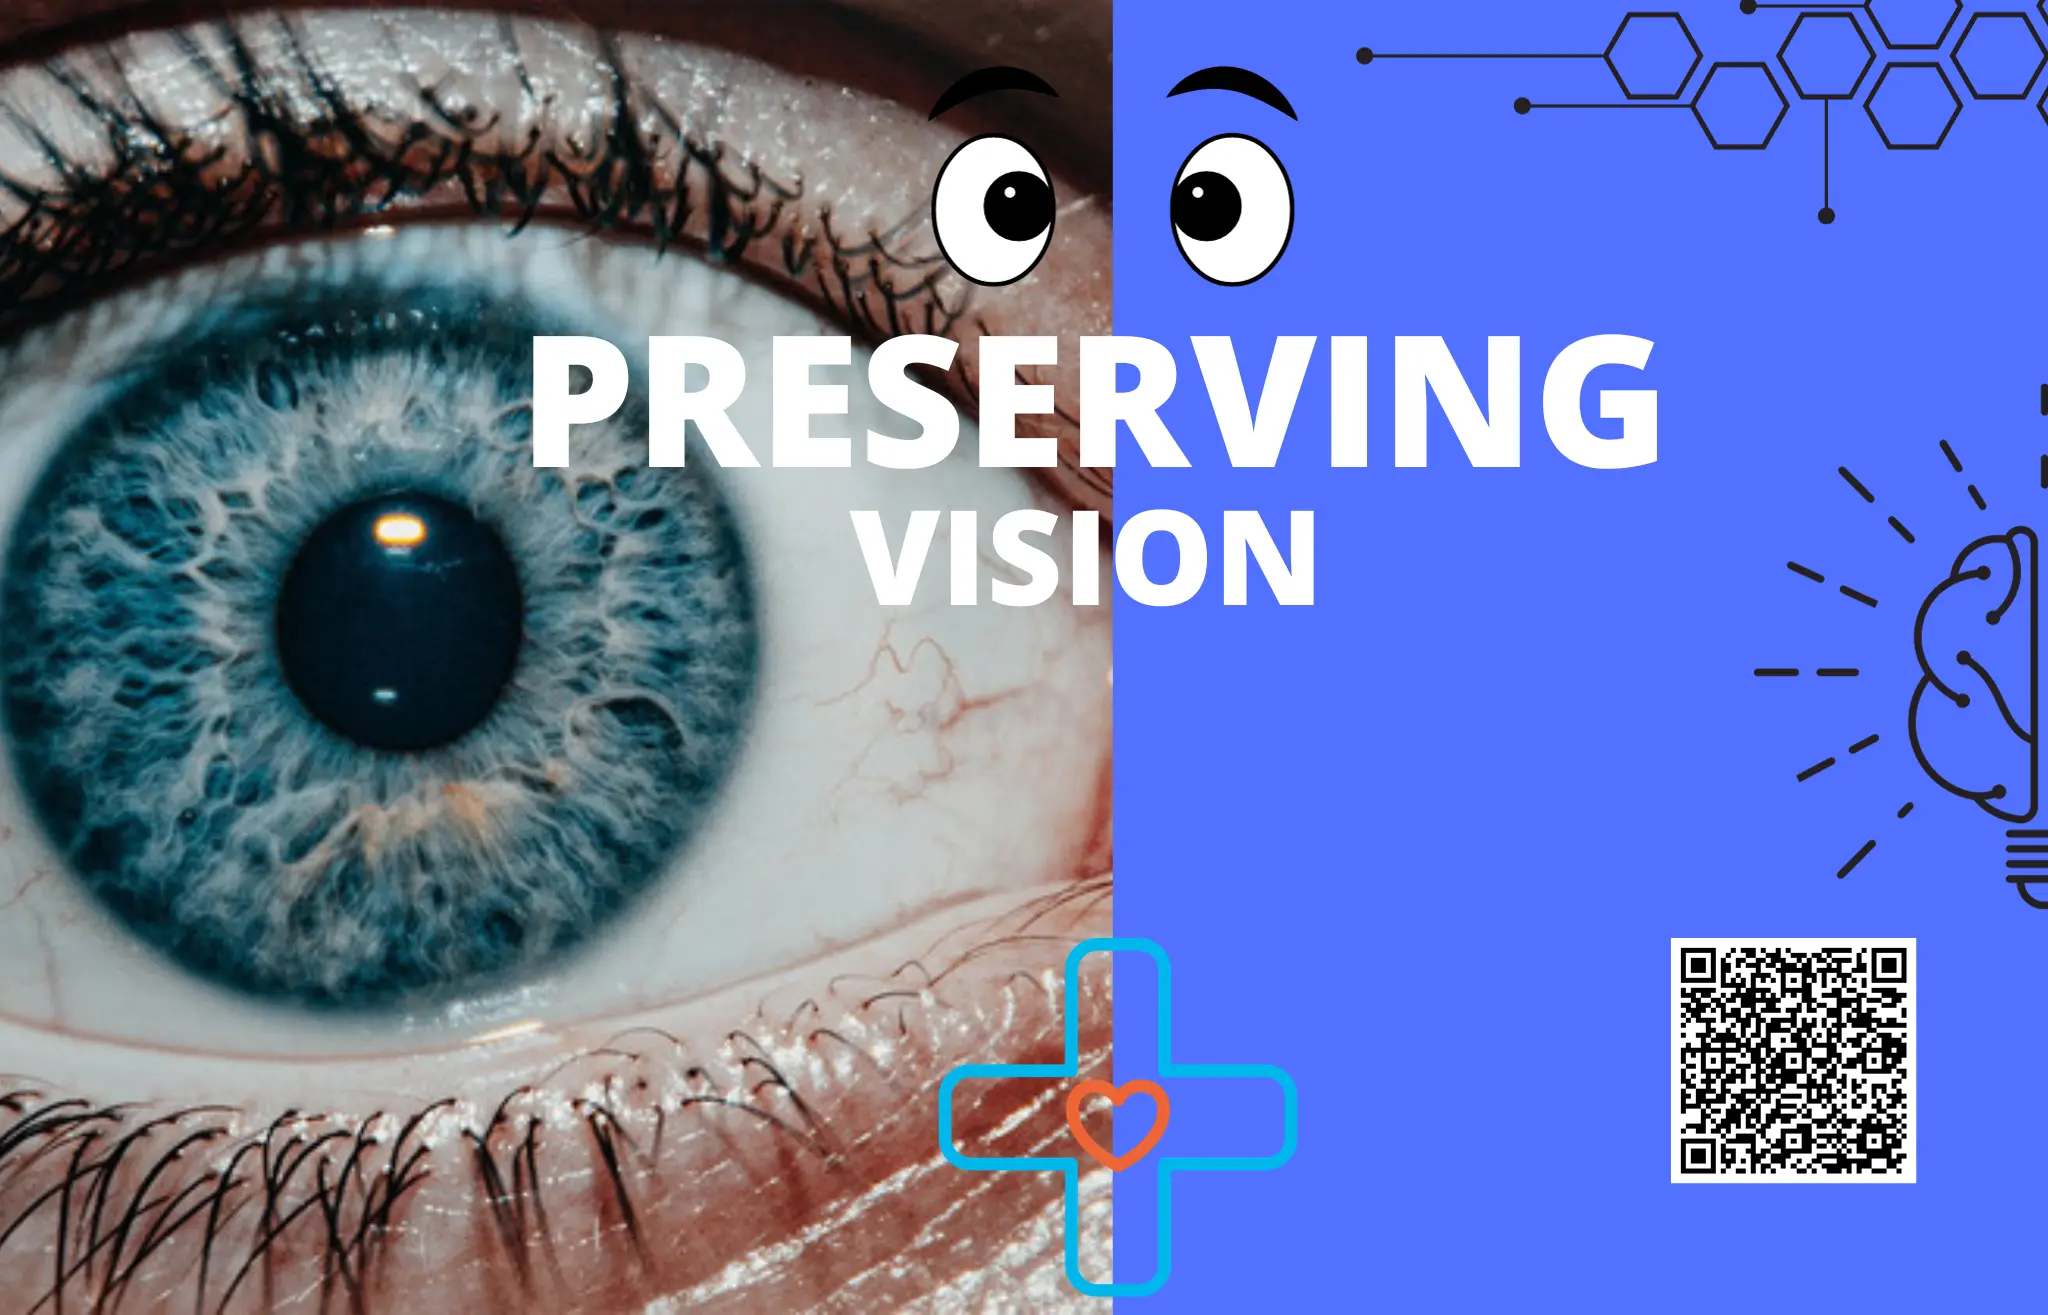 "Preserving Vision: Avoiding Common Habits and Factors That Damage Your Eyes"